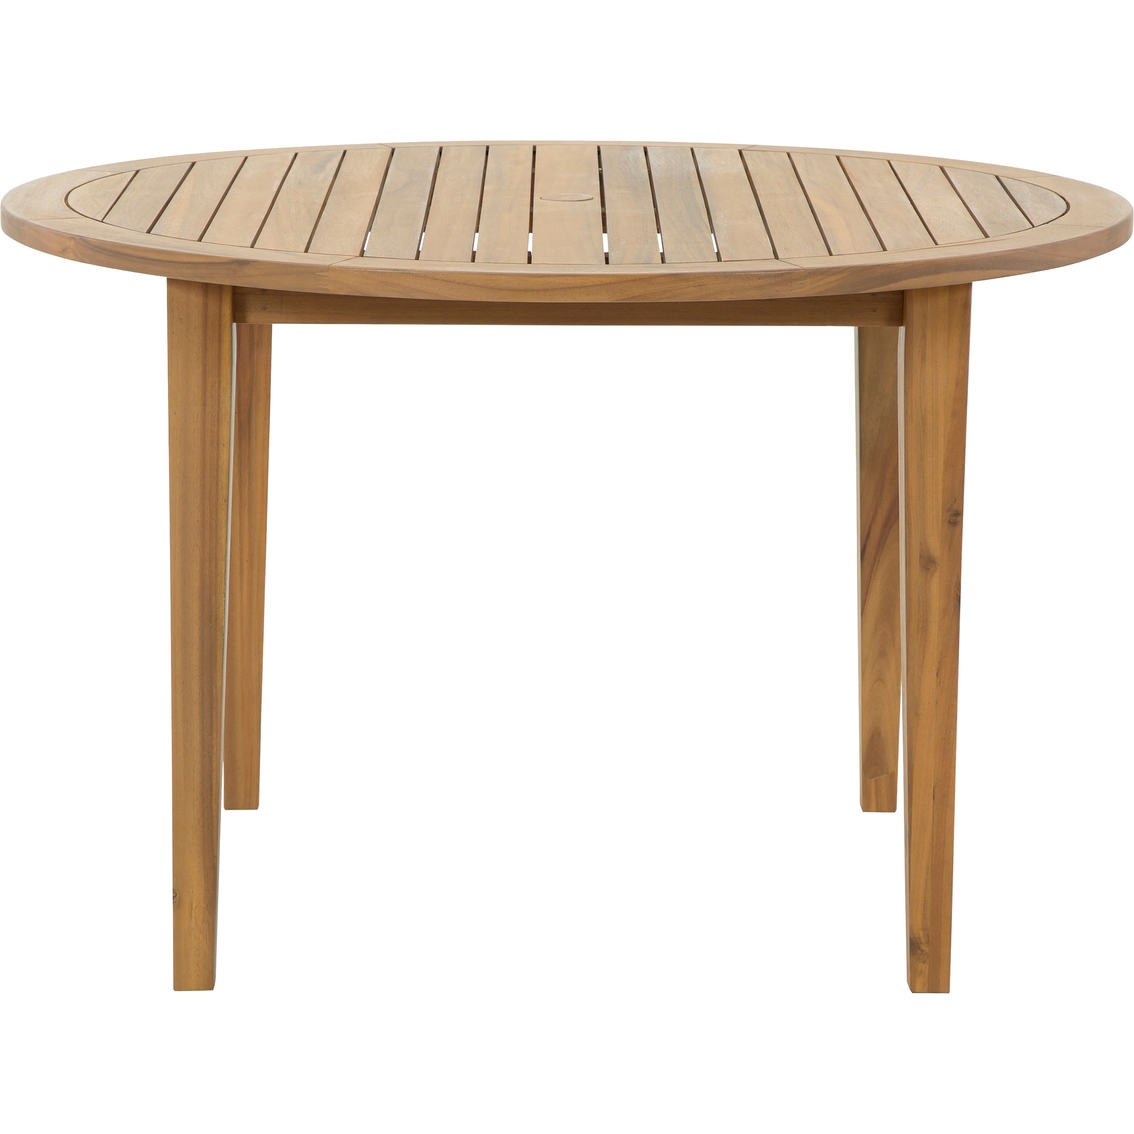 Signature Design by Ashley Janiyah Outdoor Round Dining Table - Image 2 of 6